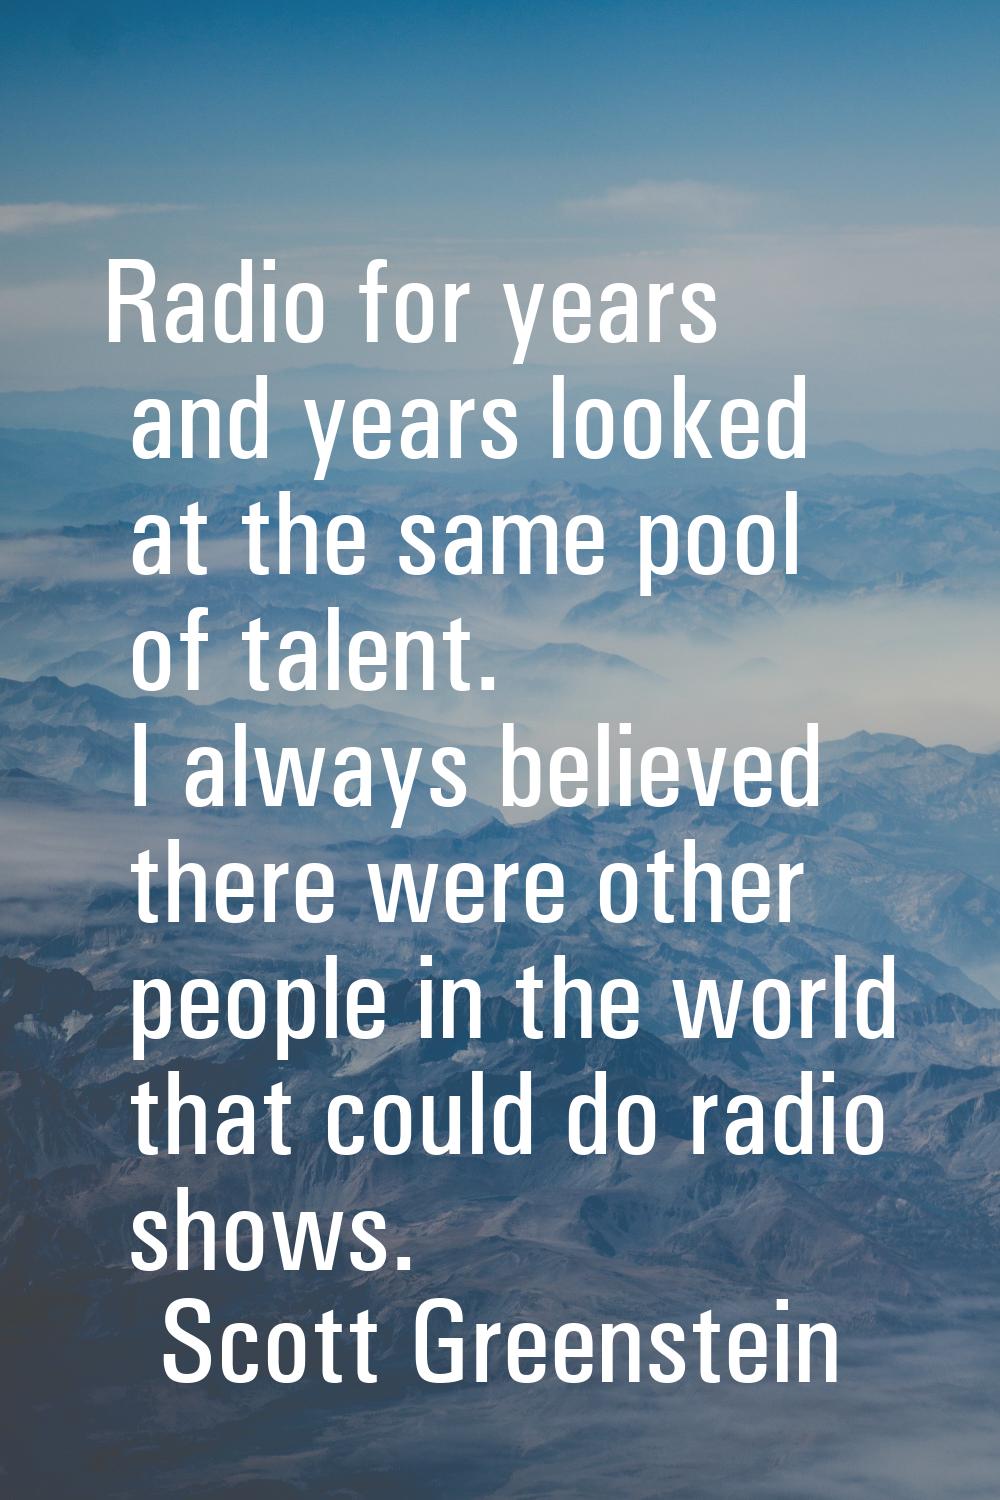 Radio for years and years looked at the same pool of talent. I always believed there were other peo